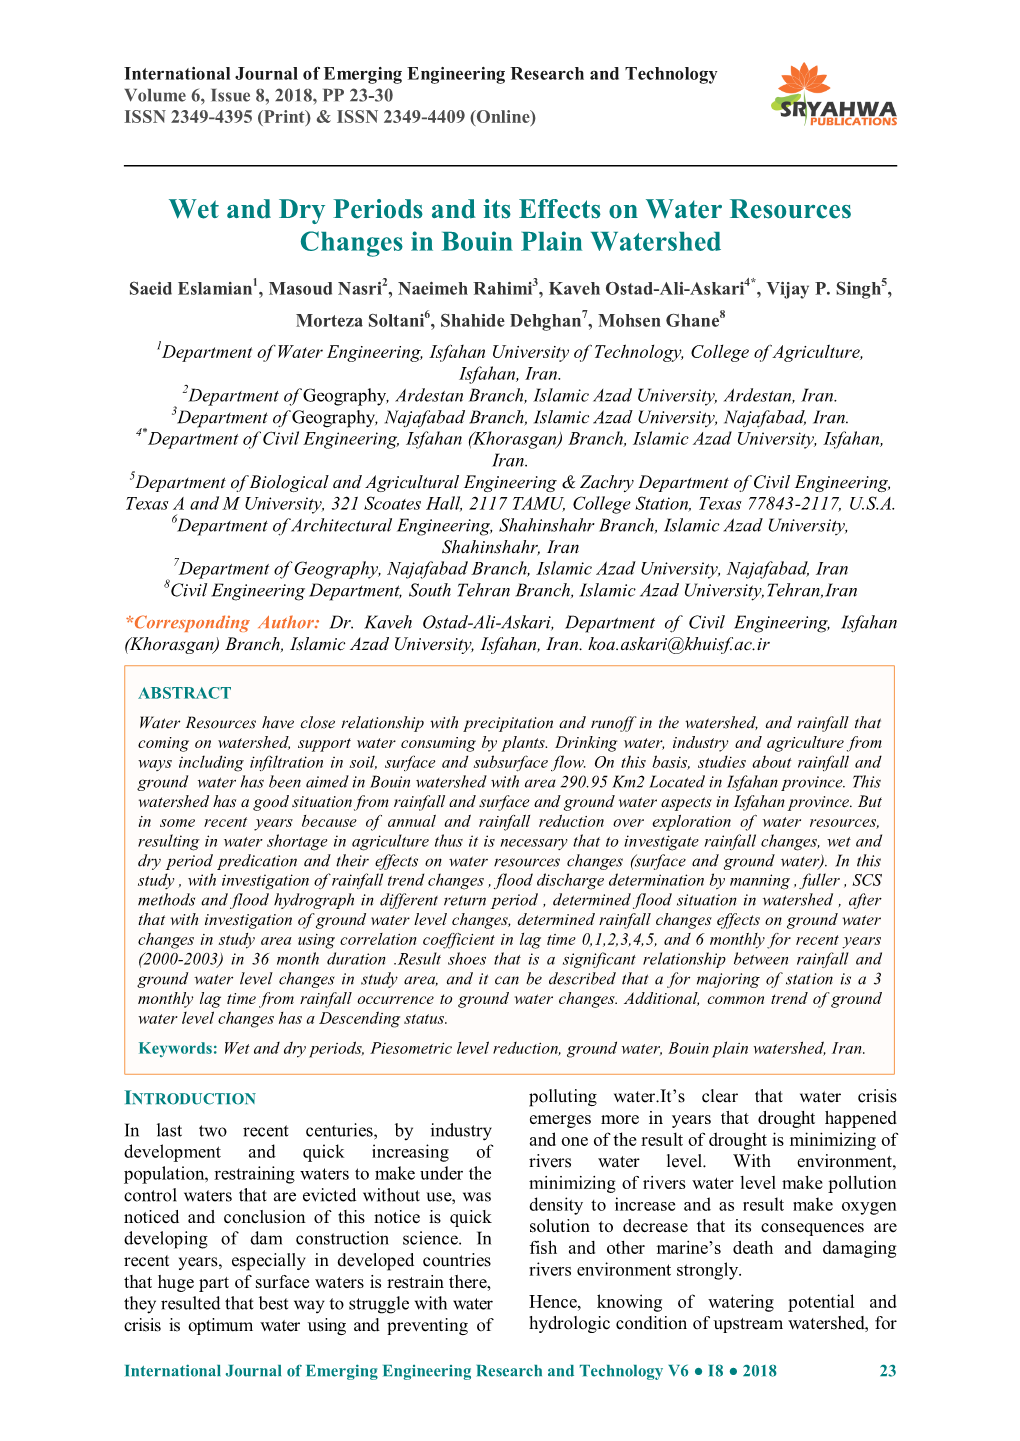 Wet and Dry Periods and Its Effects on Water Resources Changes in Bouin Plain Watershed